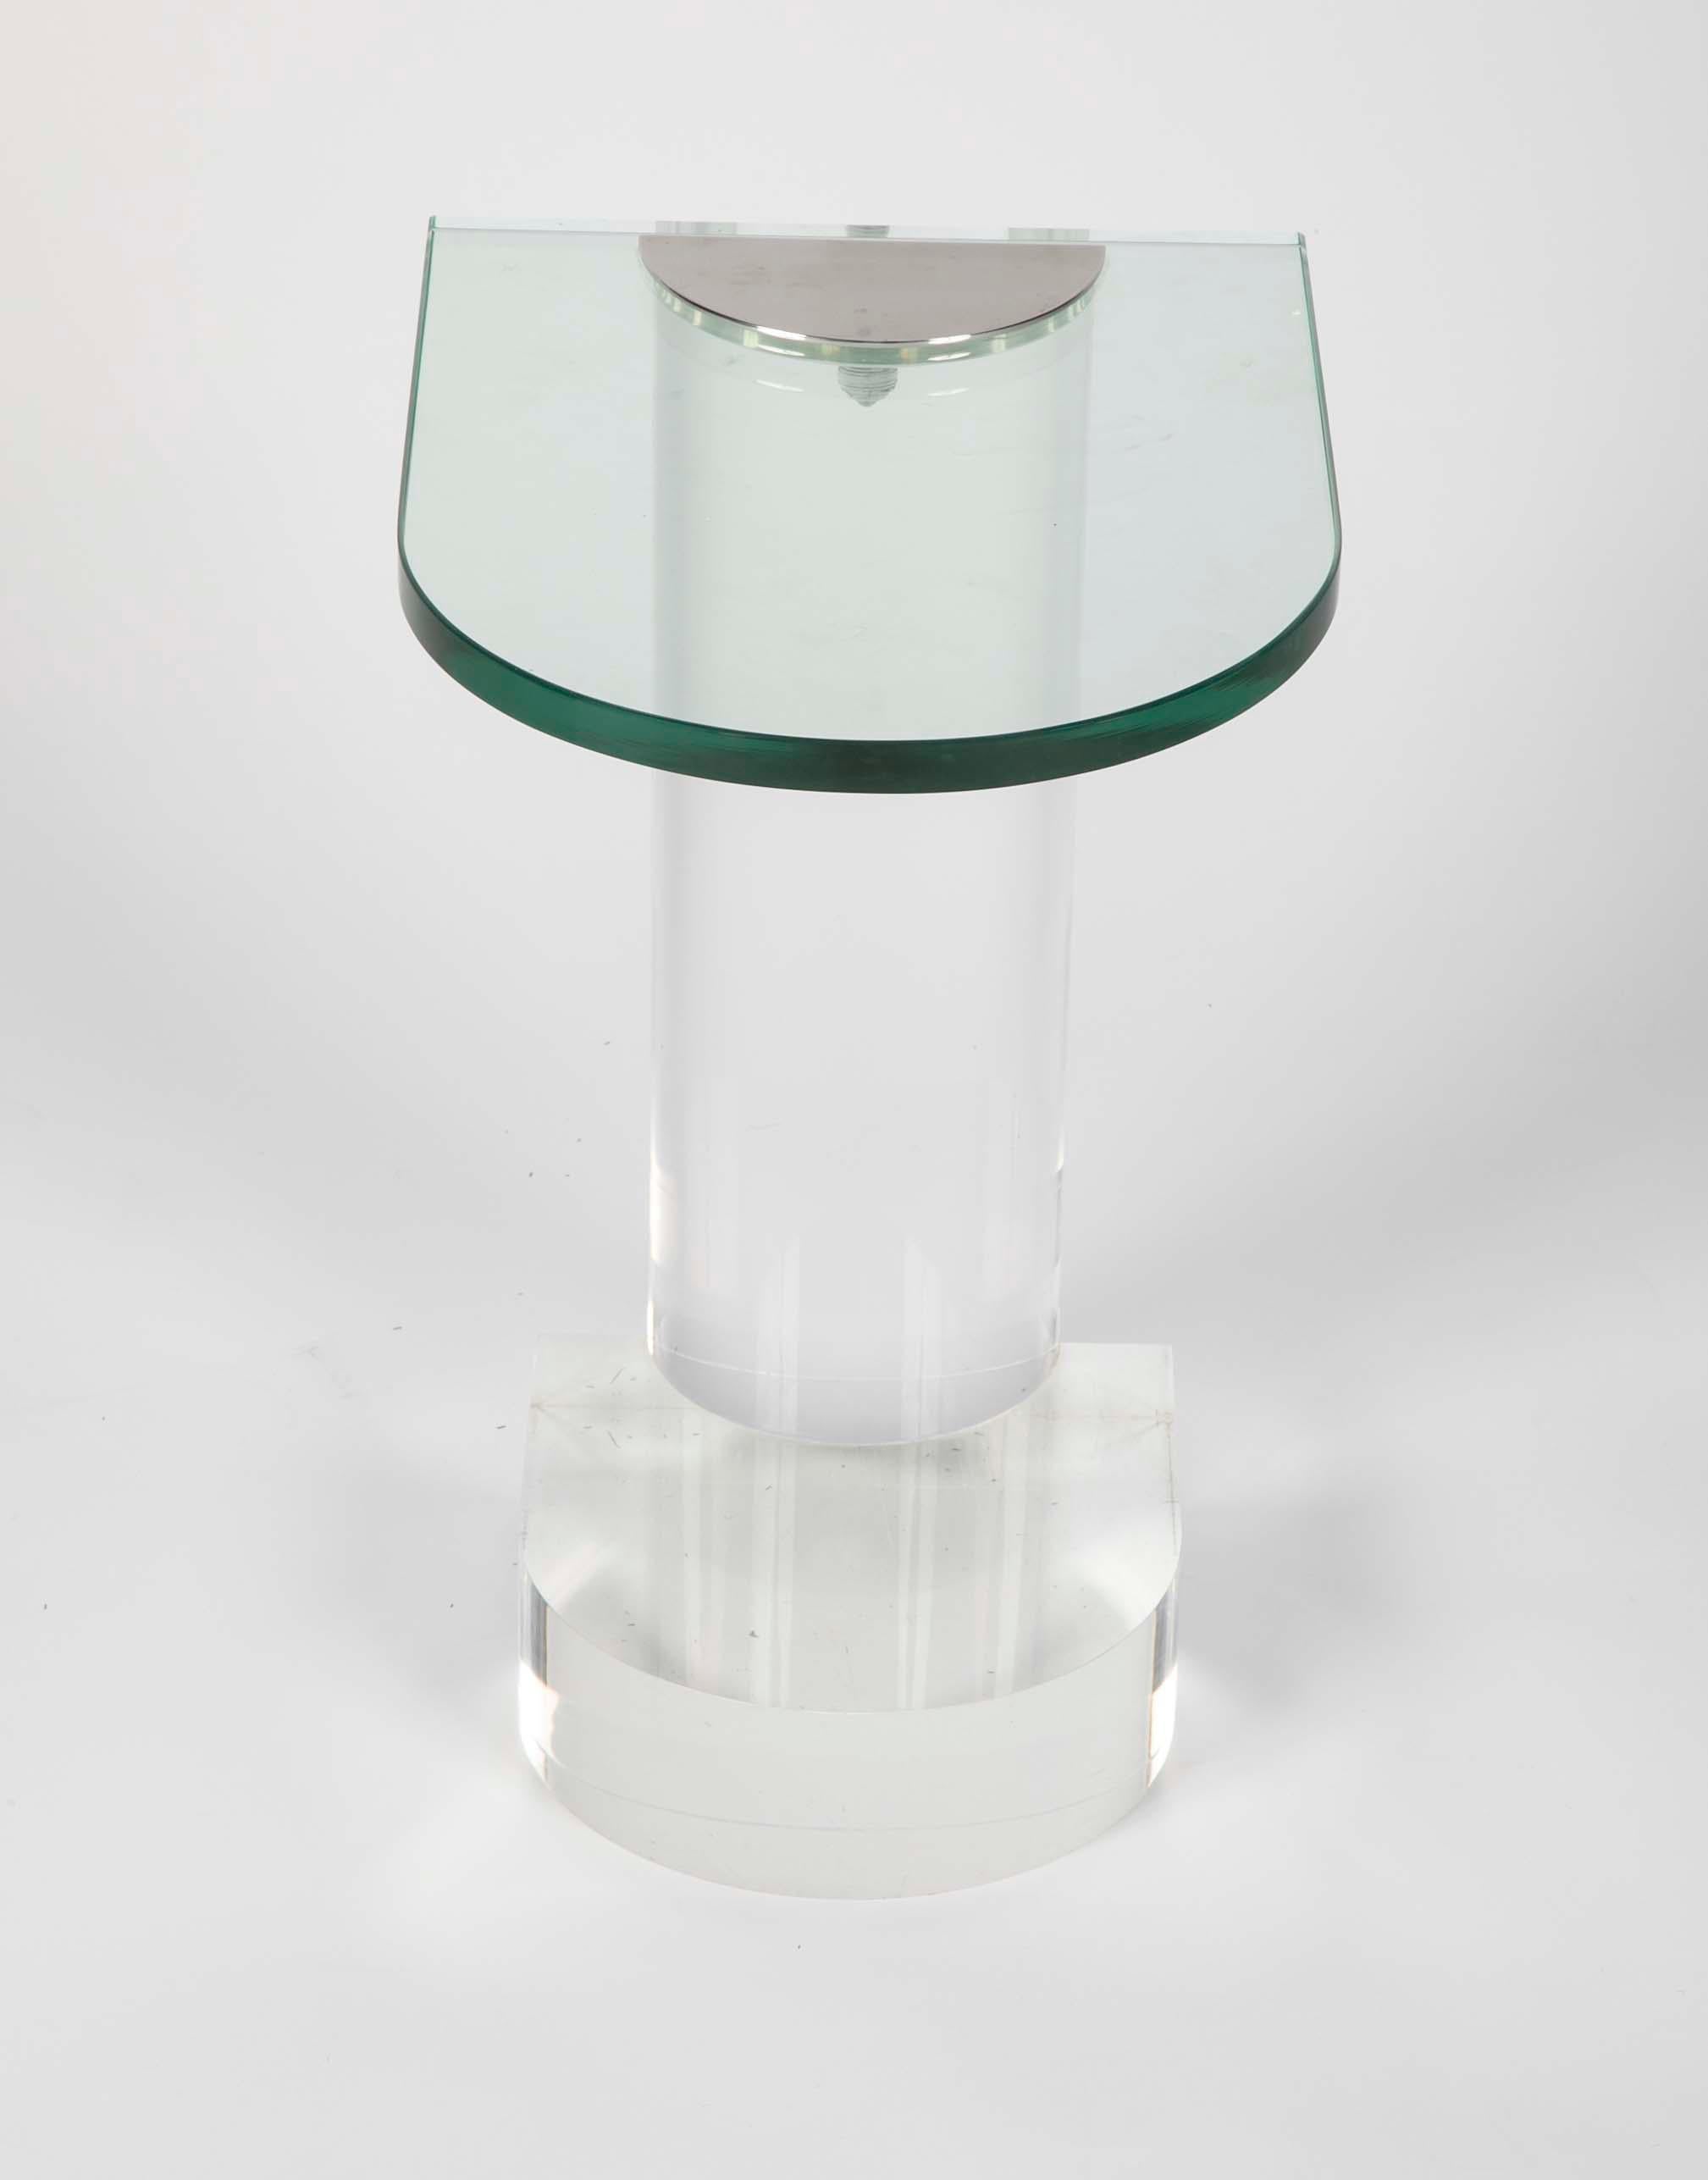 A side table in the manner of Karl Springer but attributed to Lorin Marsh. Lucite base with glass table and chromed metal hardware.